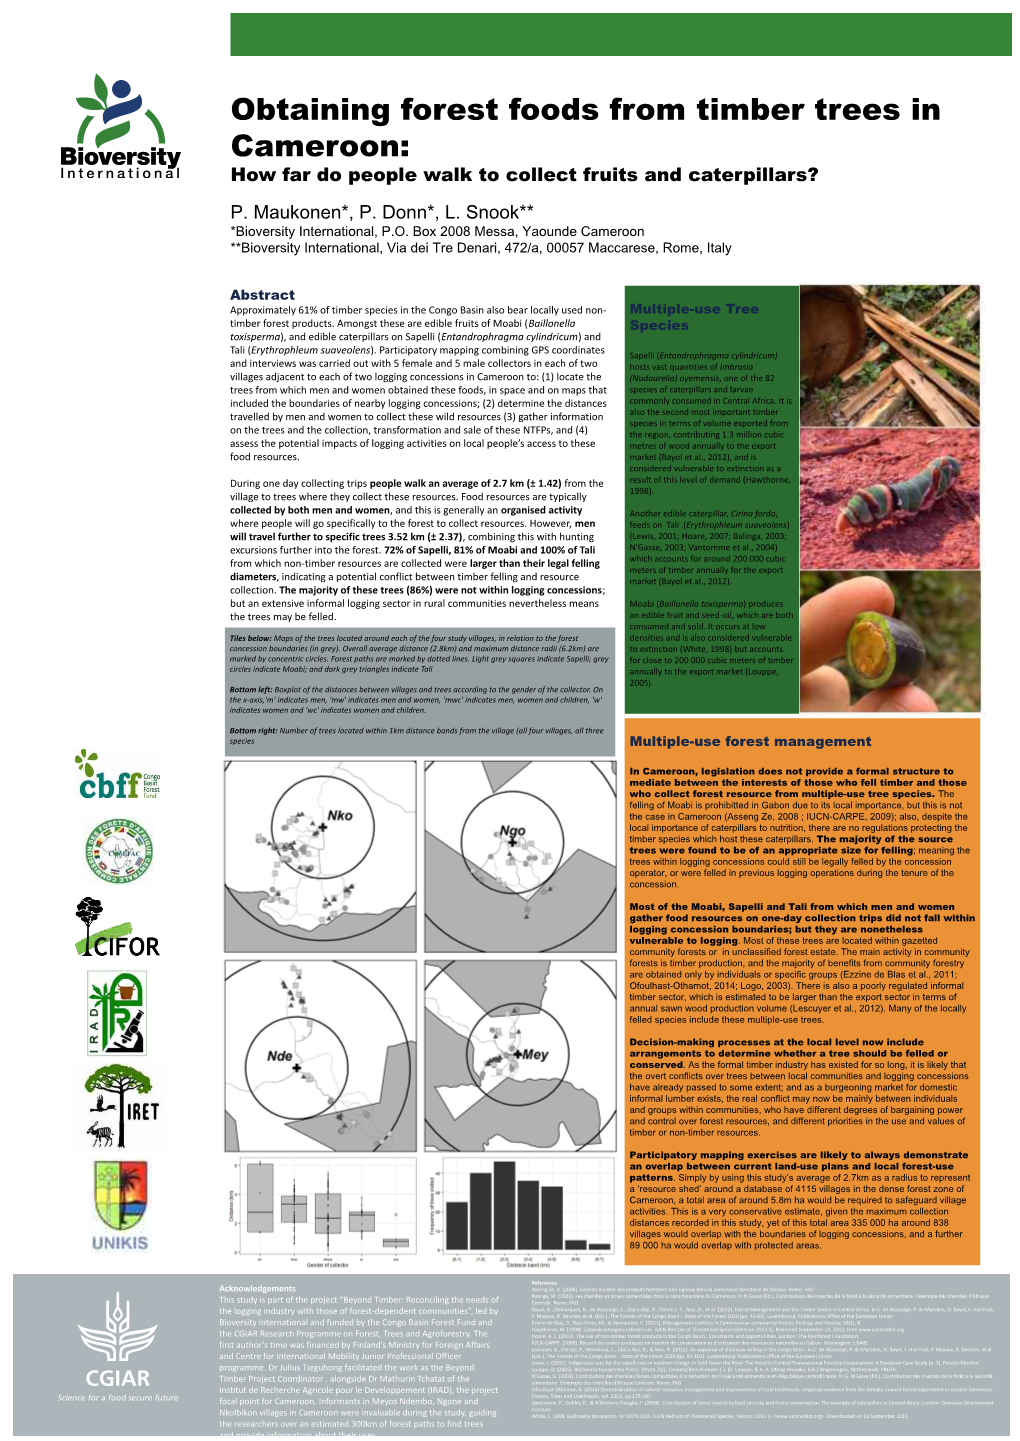 Obtaining Forest Foods from Timber Trees in Cameroon: How Far Do People Walk to Collect Fruits and Caterpillars? P